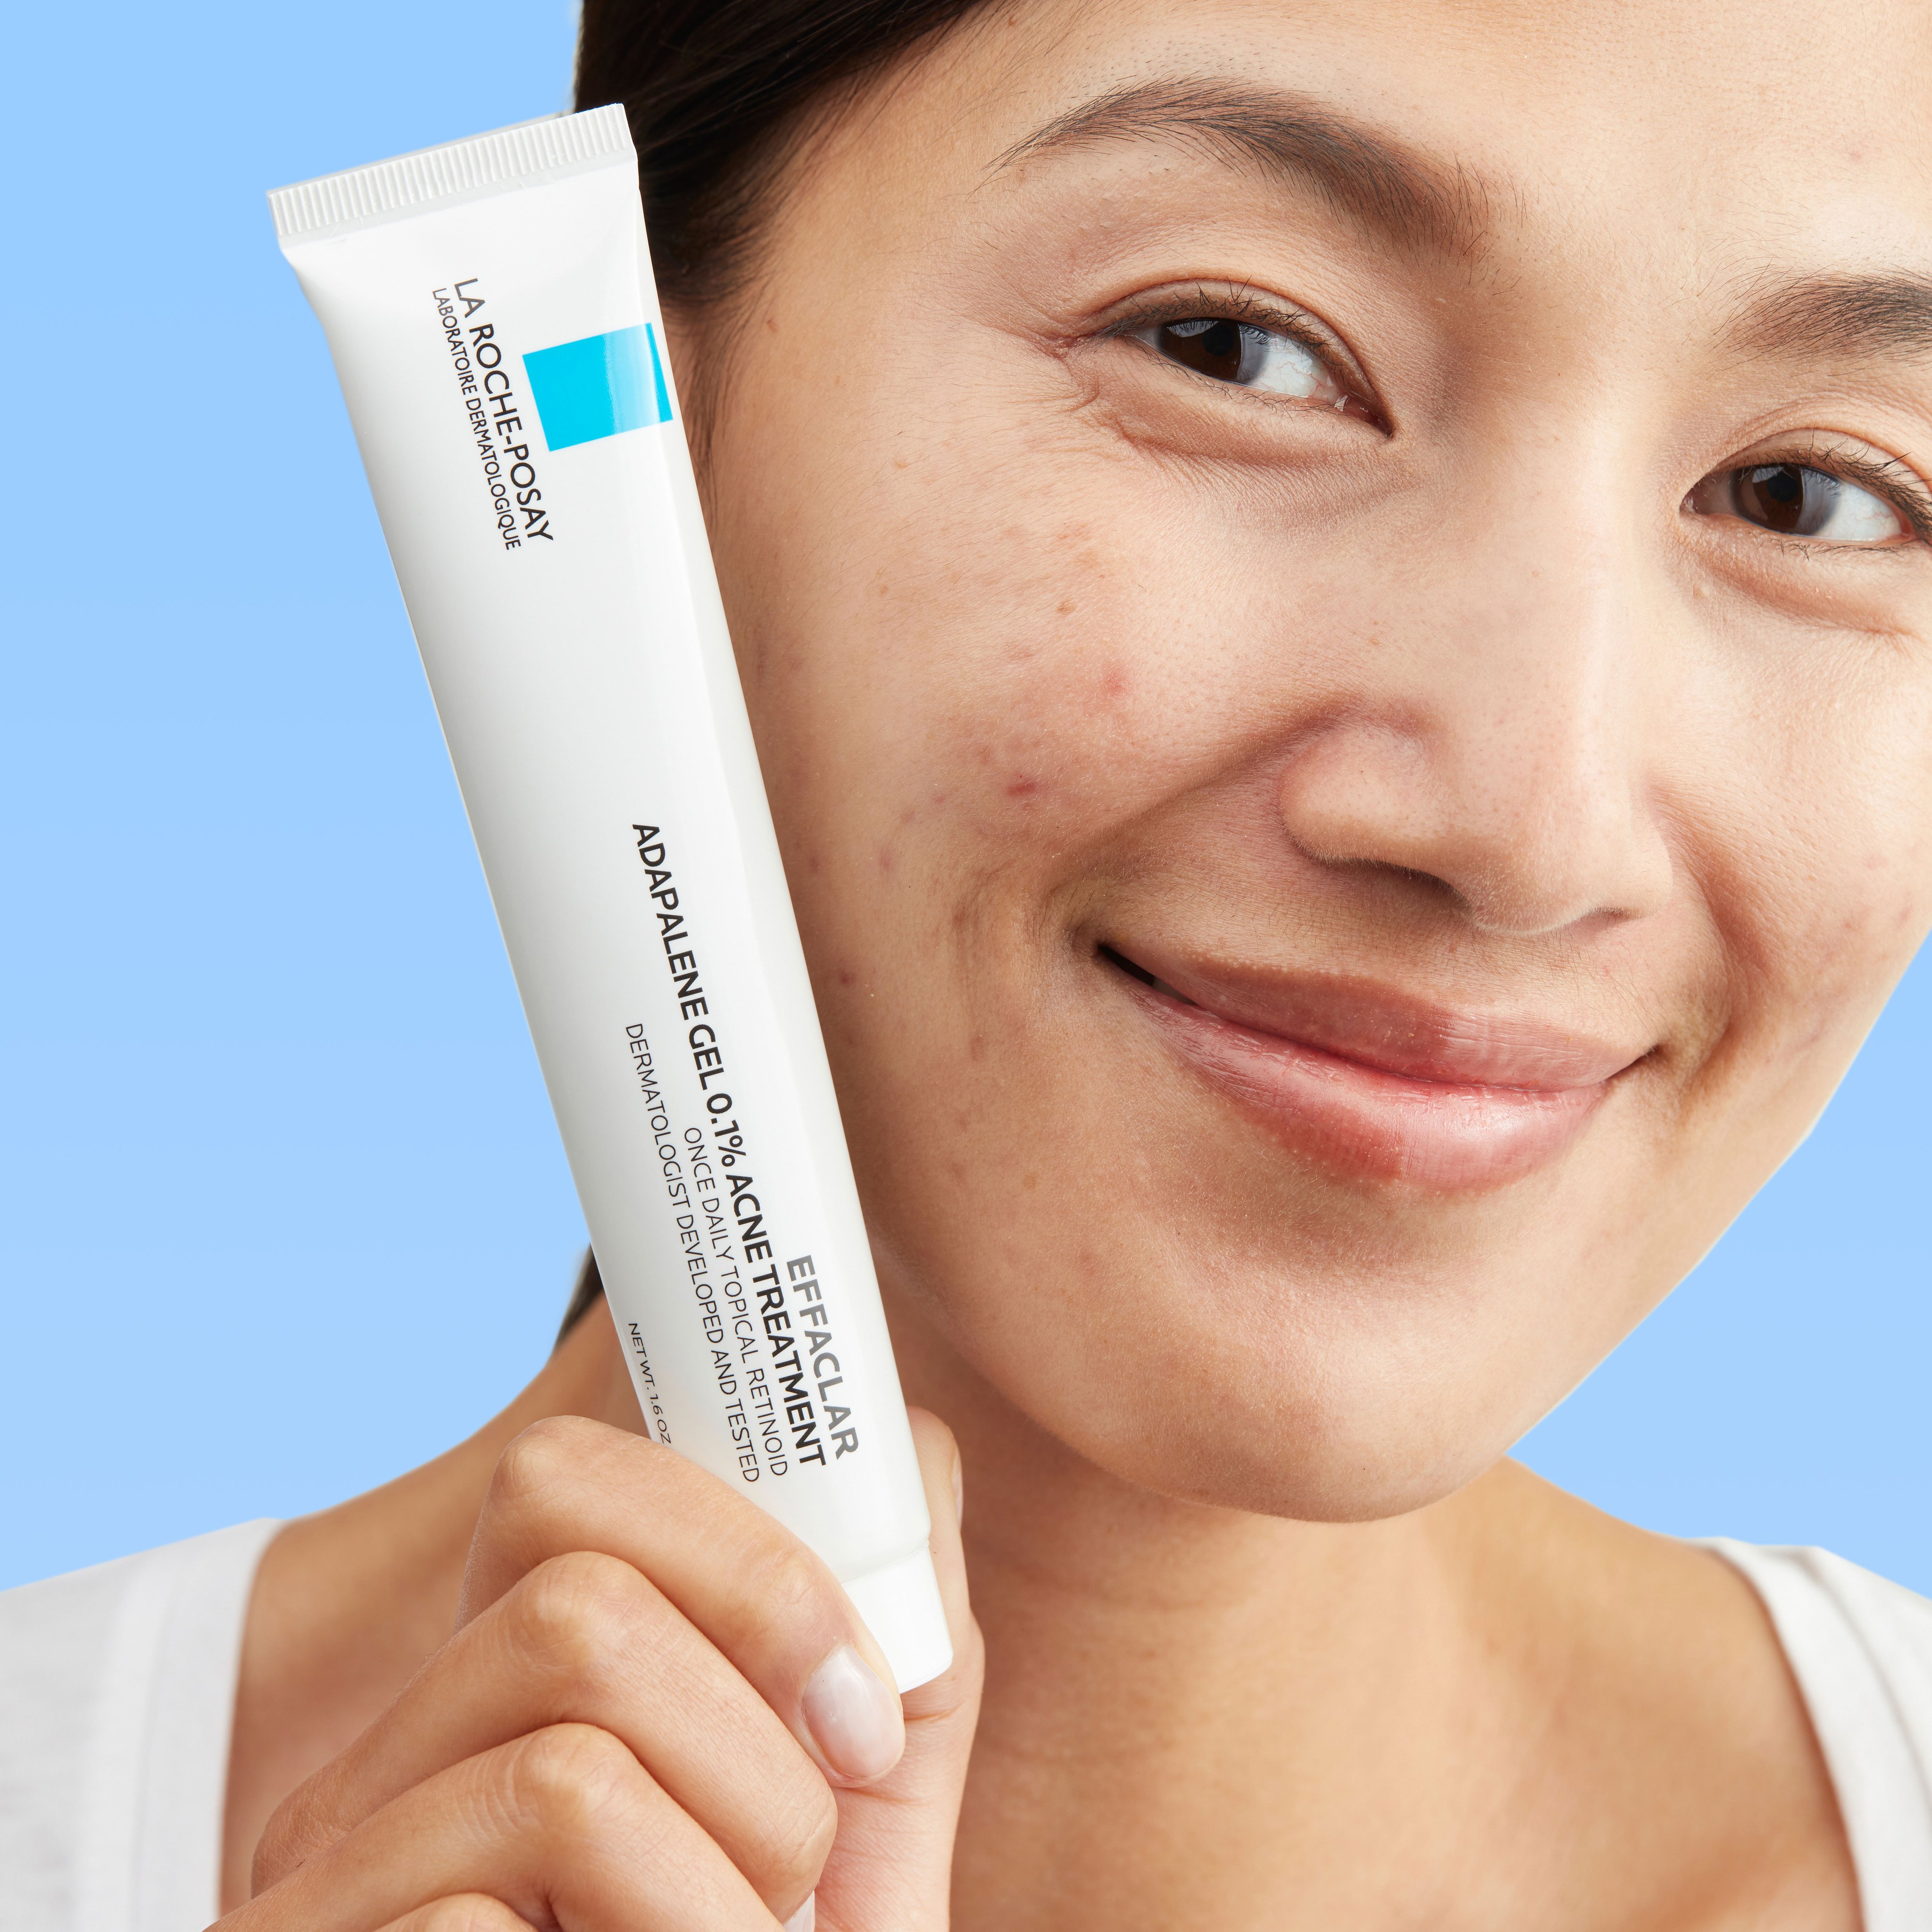 La Roche-Posay on Twitter: "#Effaclar Adapalene Gel 0.1% quick facts! 🌟 🔵 clear blackheads, whiteheads, acne blemishes &amp; clogged pores 🔵 apply at night 🌃 🔵 daily topical retinoid #LaRochePosayUSA #